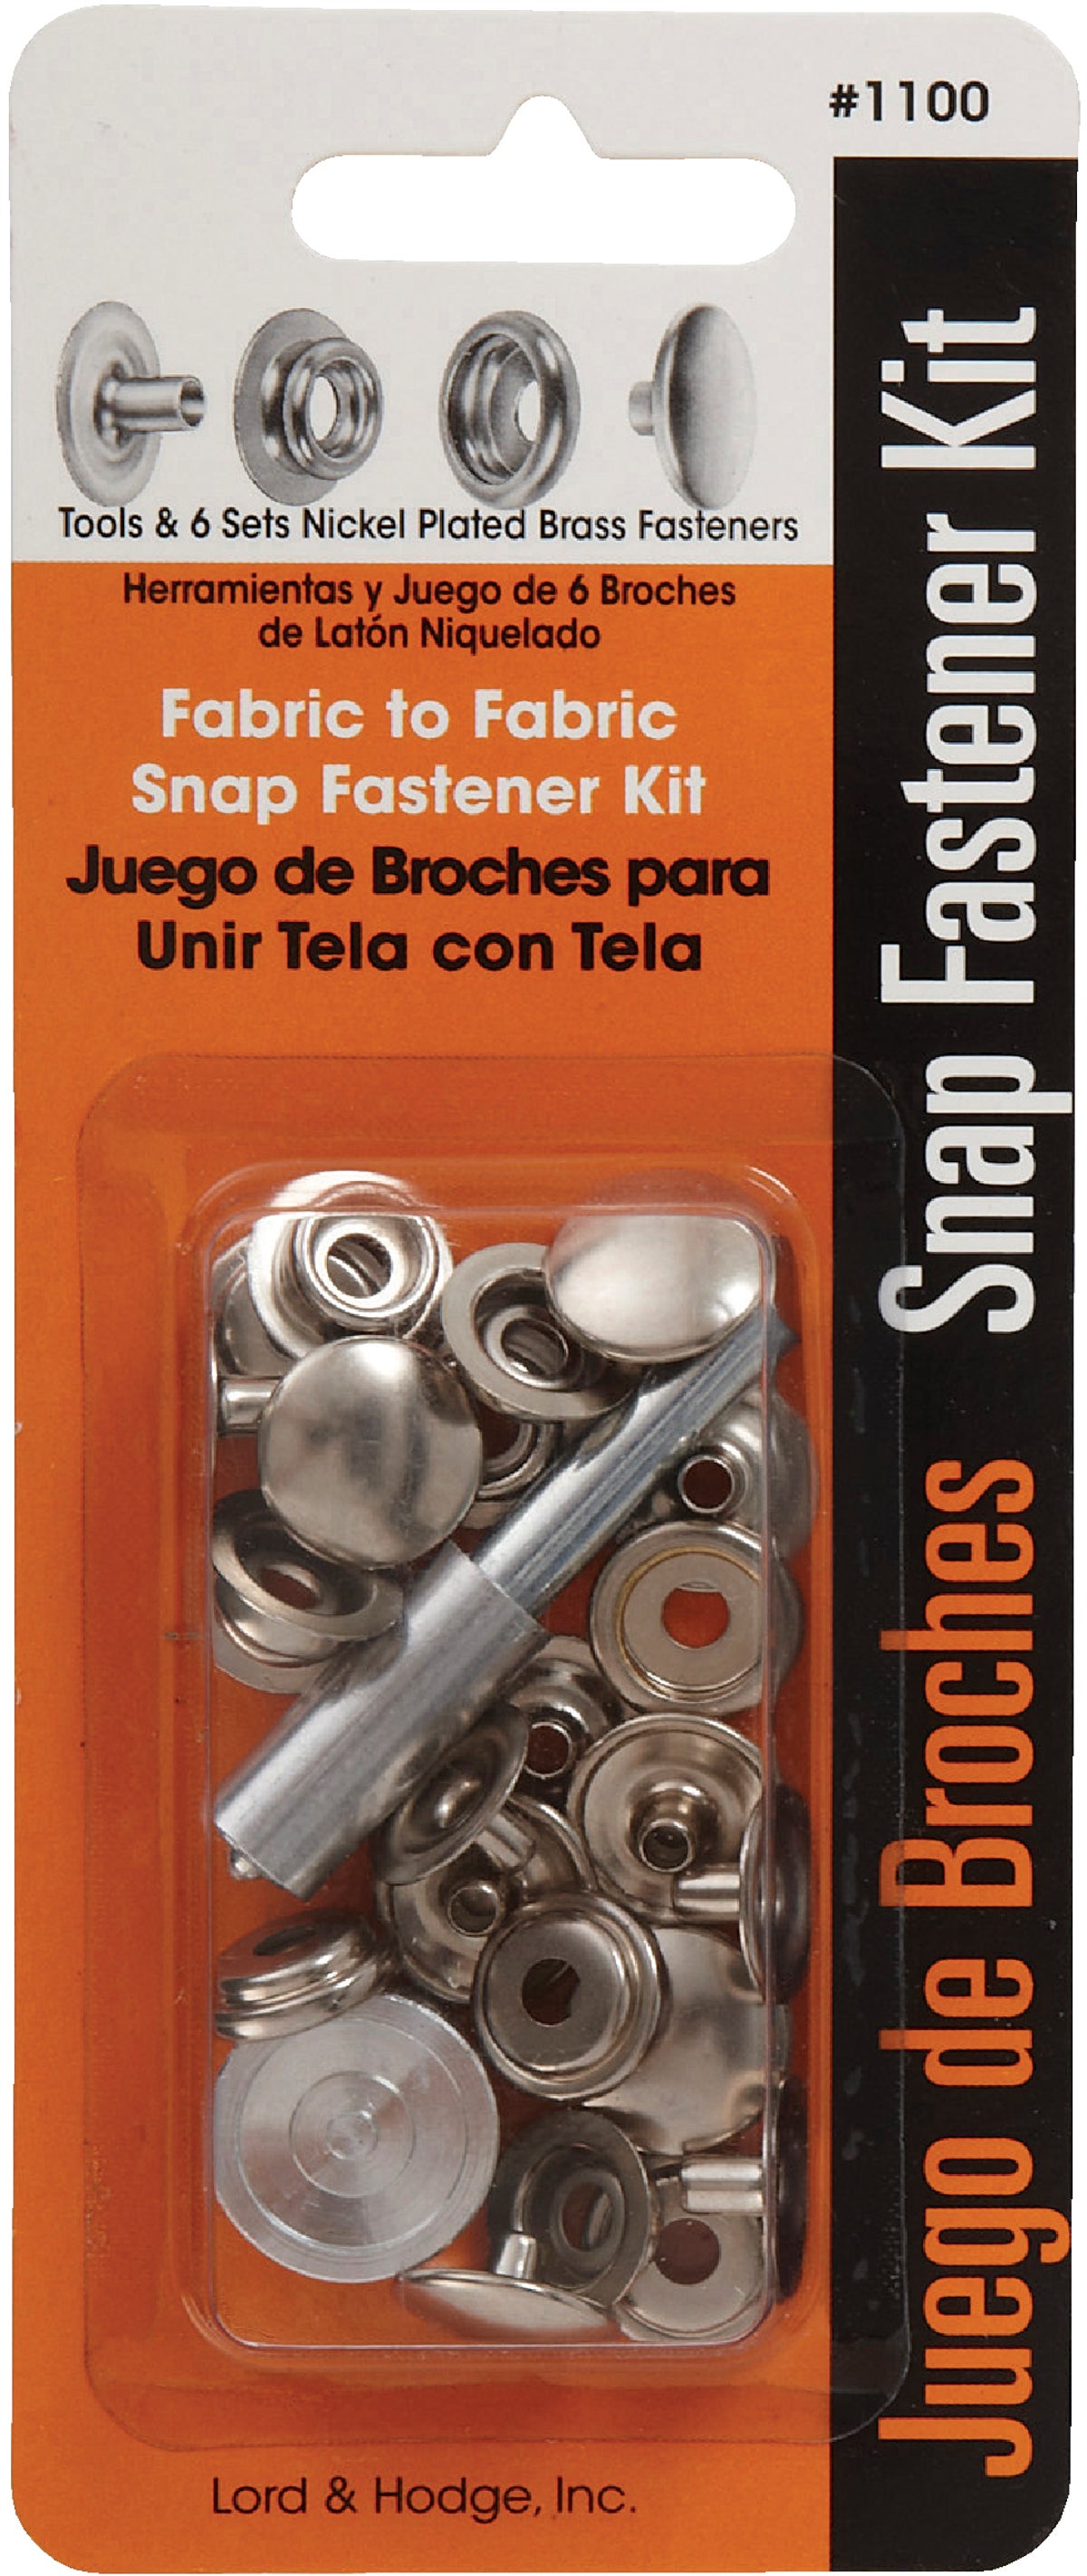 Lord & Hodge Snap Fastener Kit Refill 